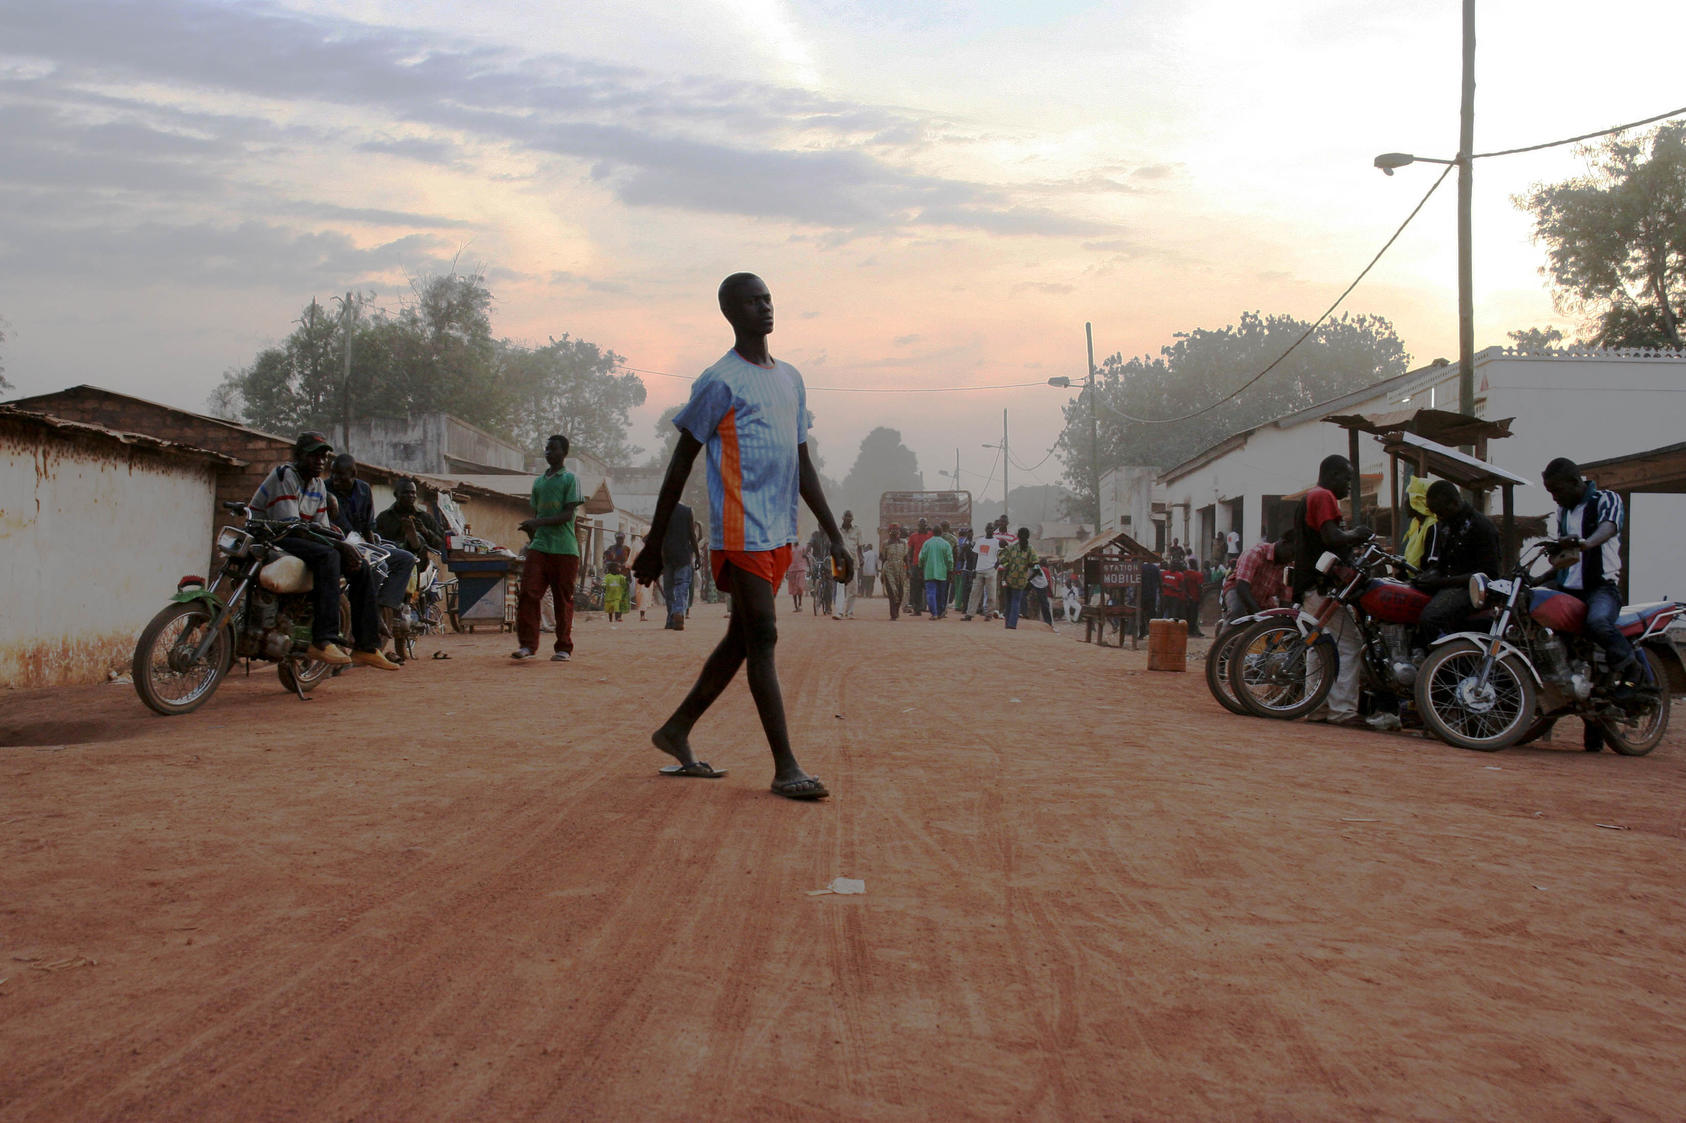 The main street in Paoua, a town in the northwest of the Central African Republic. February 8, 2009. (Simon Davis/U.K. Department for International Development)]